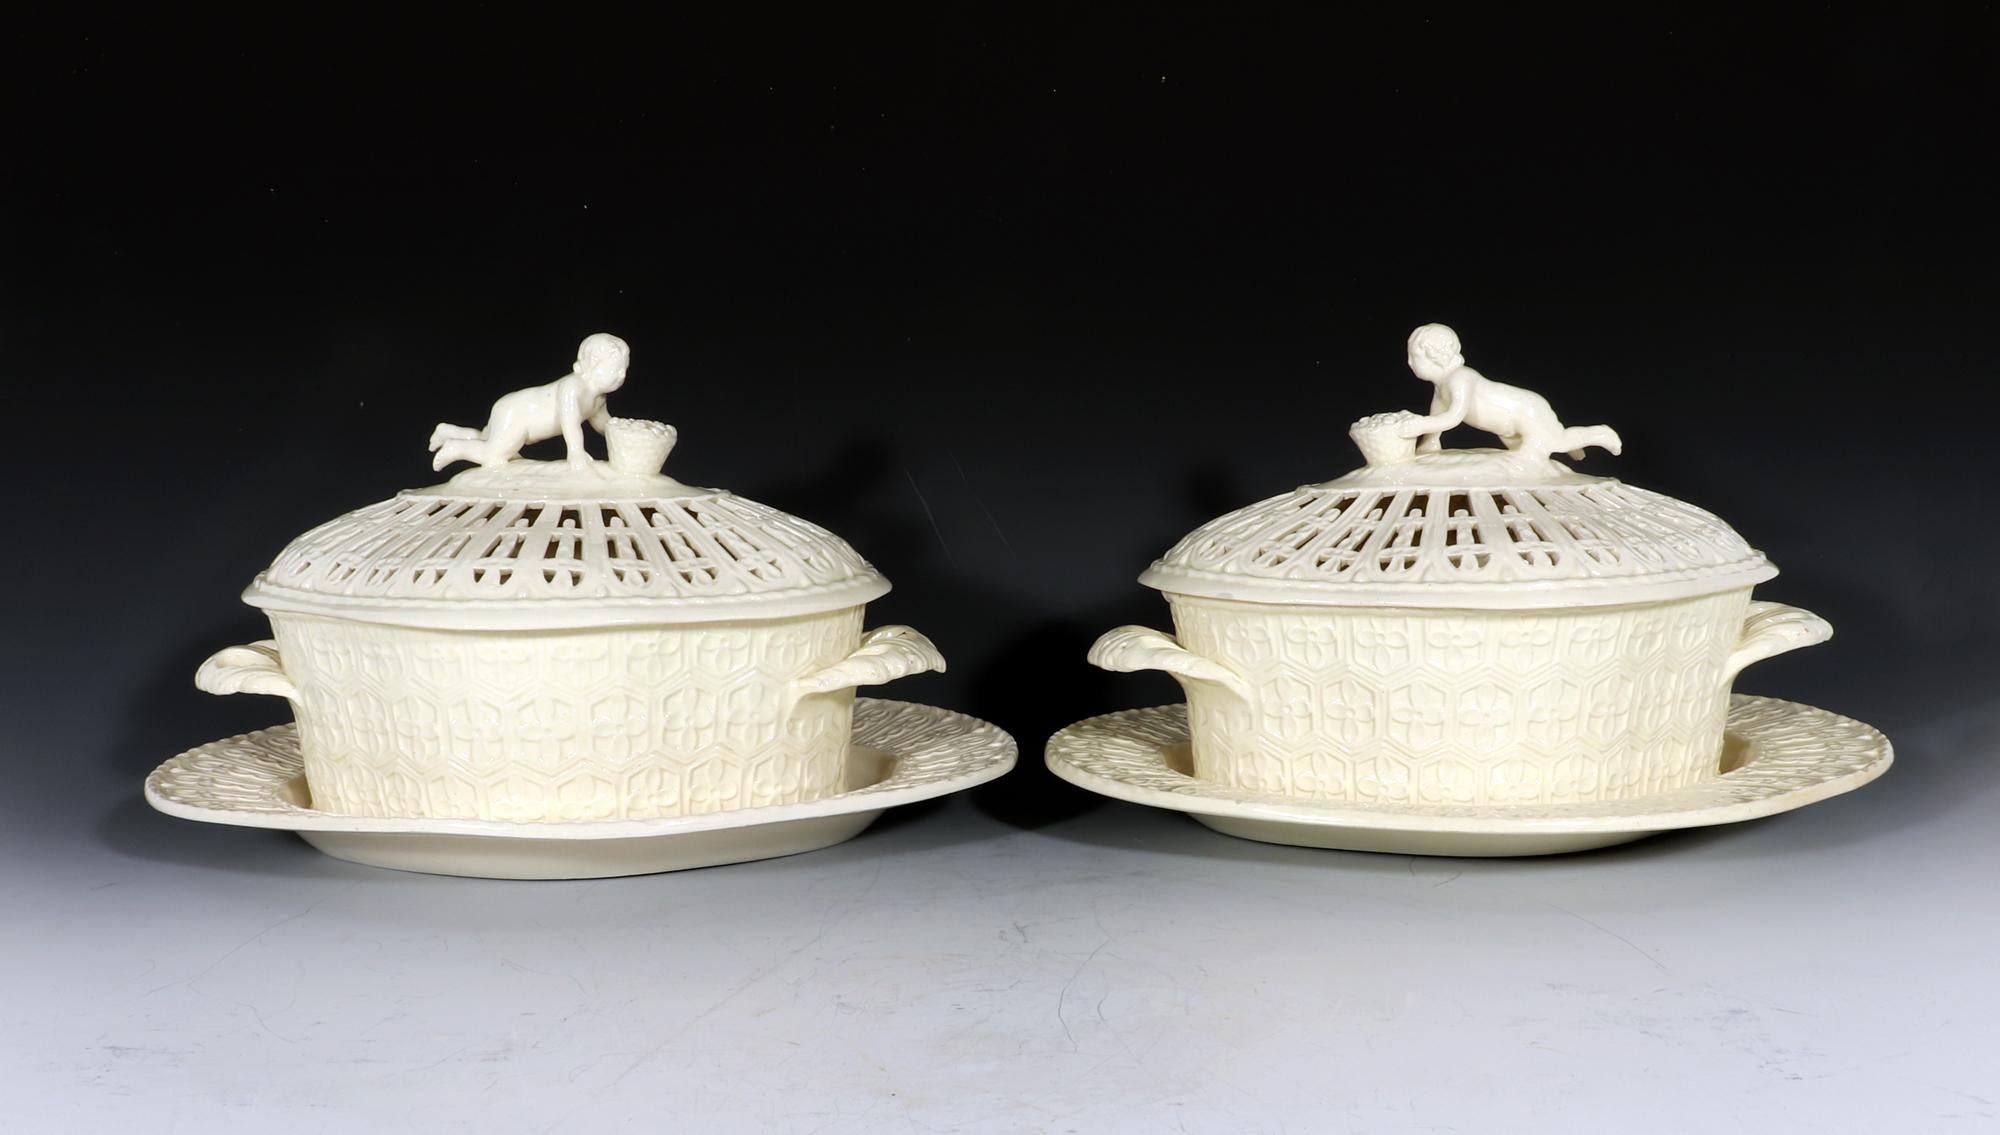 Creamware chestnut covered baskets and stands with figural finial,
Marked Heath,
circa 1800-1790

The shaped oval four-lobed basket has entwined double handles to each side with leaf terminals. The body is moulded with a series of stylized